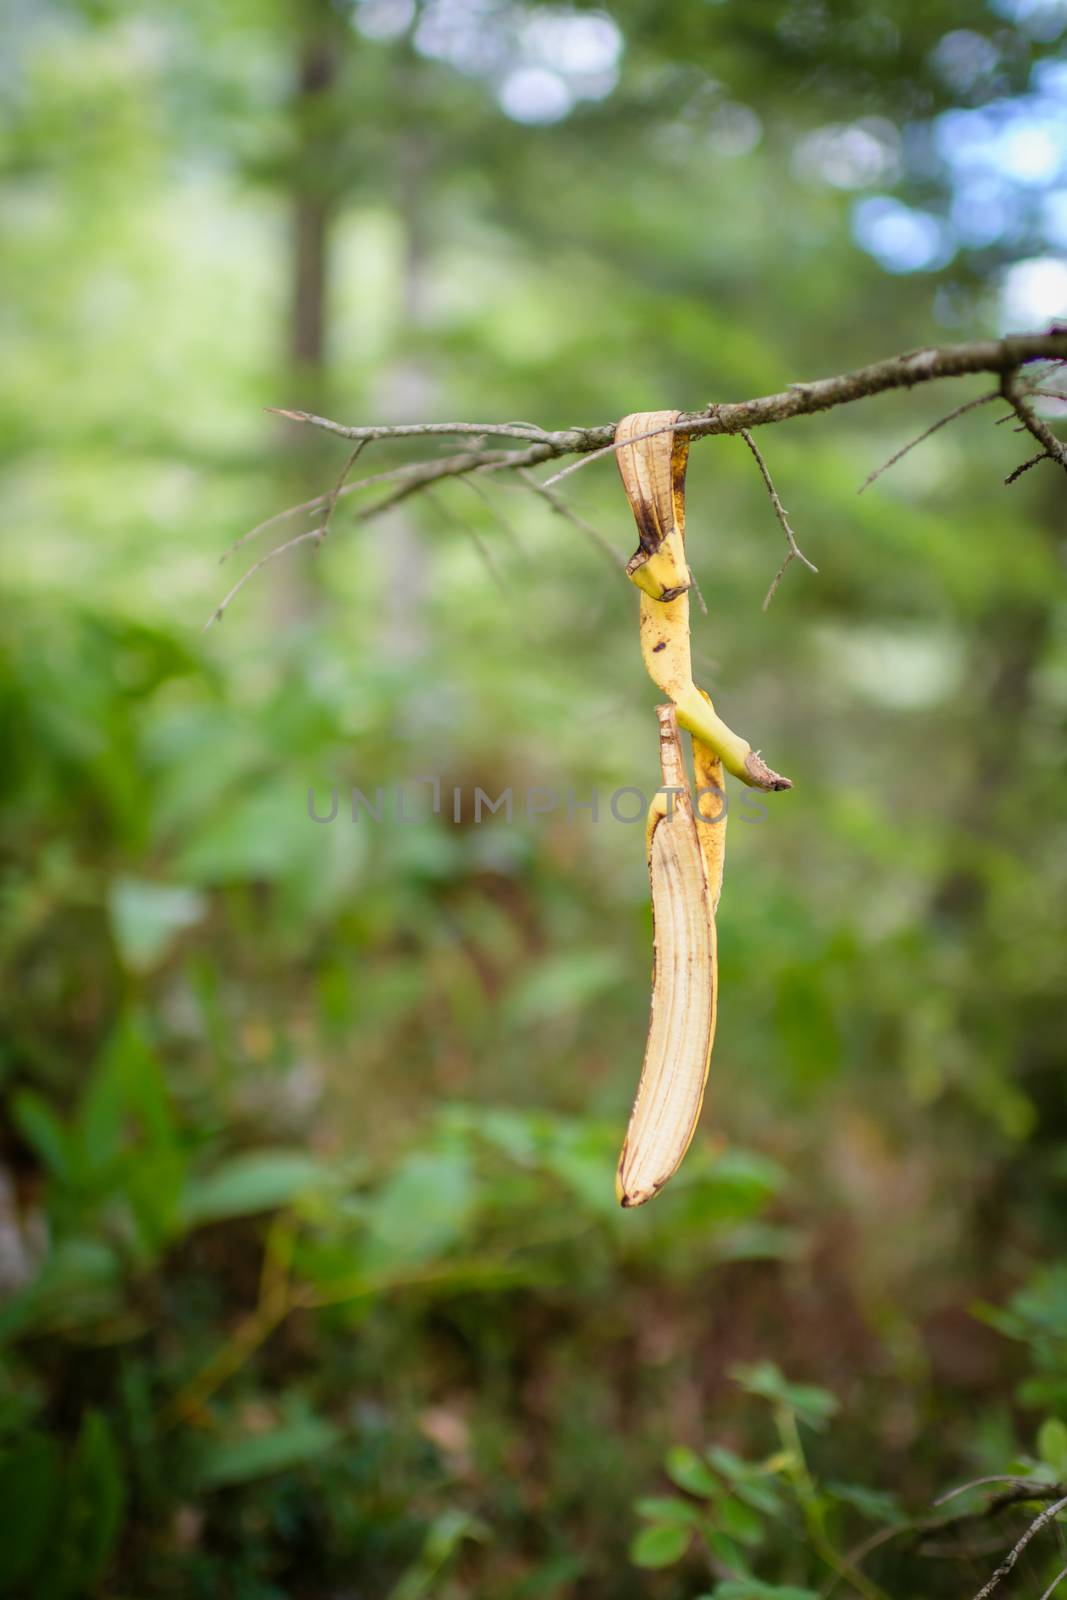 banana peel hanging from tree, bush, branch in nature by asafaric